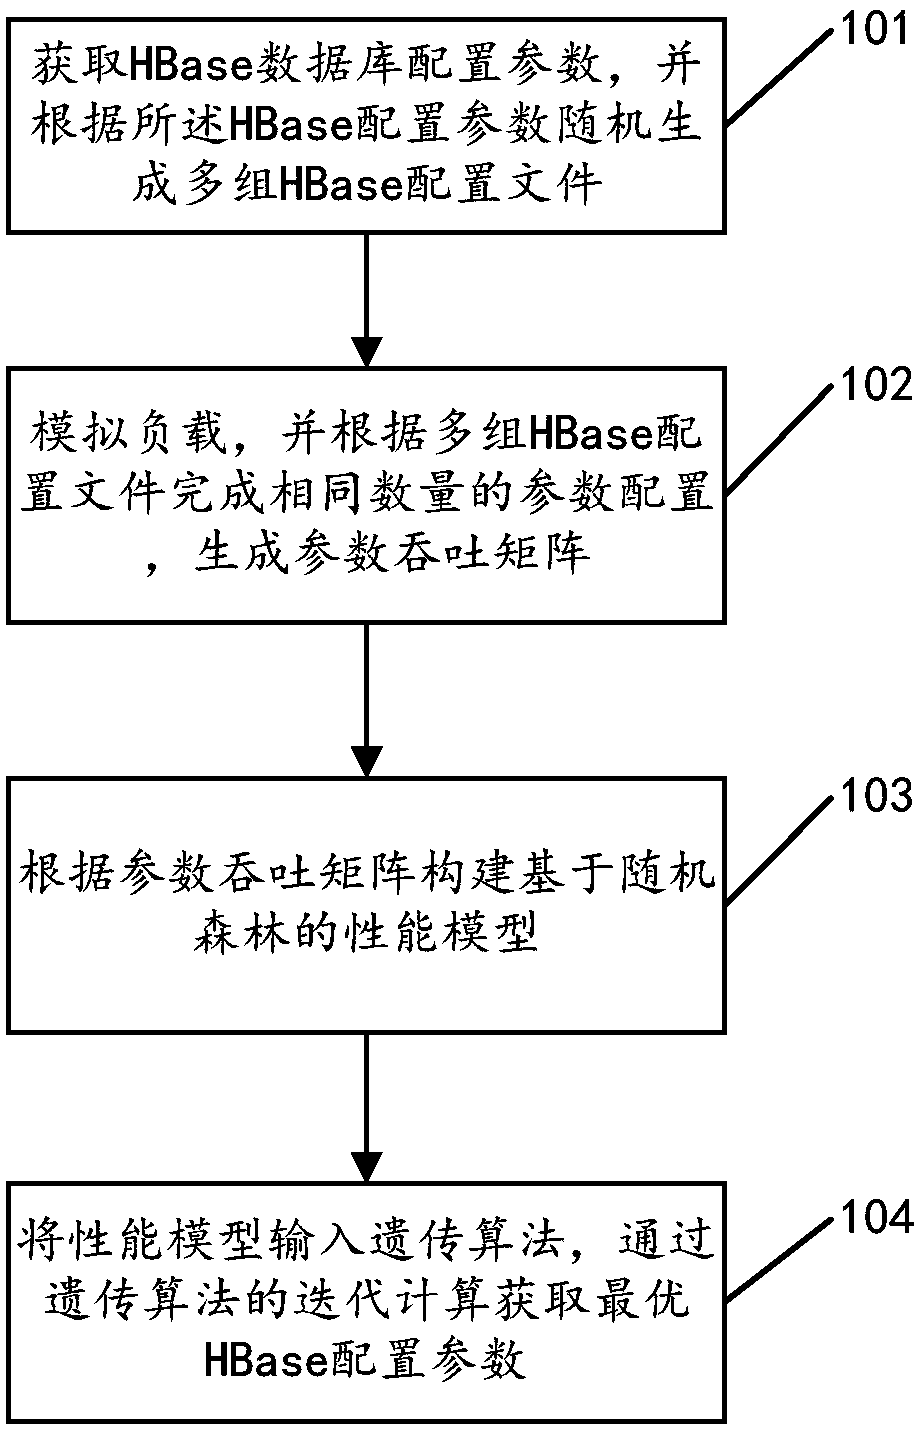 Hbase configuration parameter automatic tuning method, Hbase configuration parameter automatic tuning device and user equipment